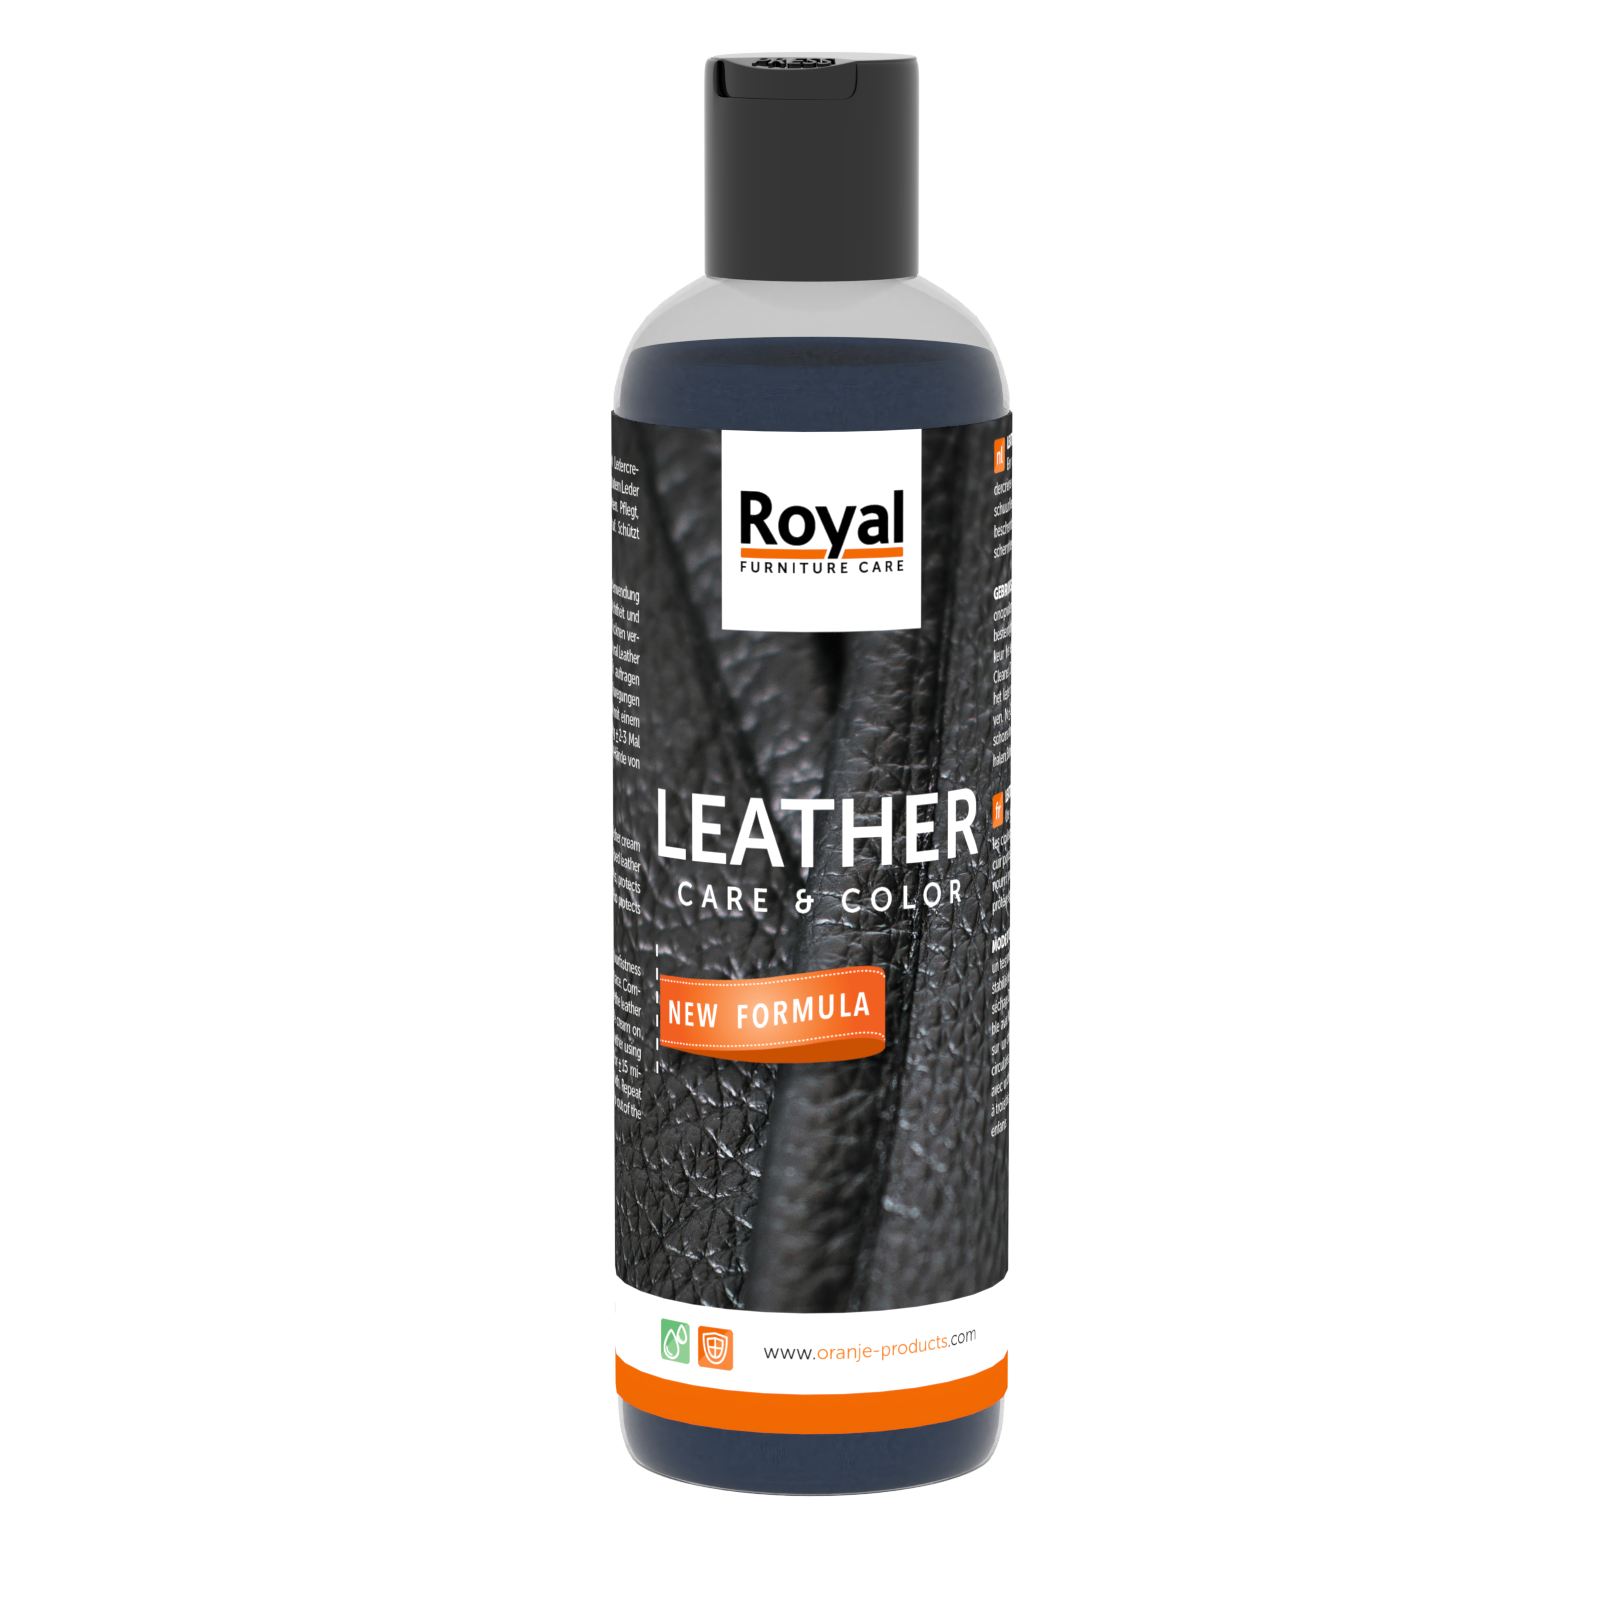 Leather care+A26:V26 & color